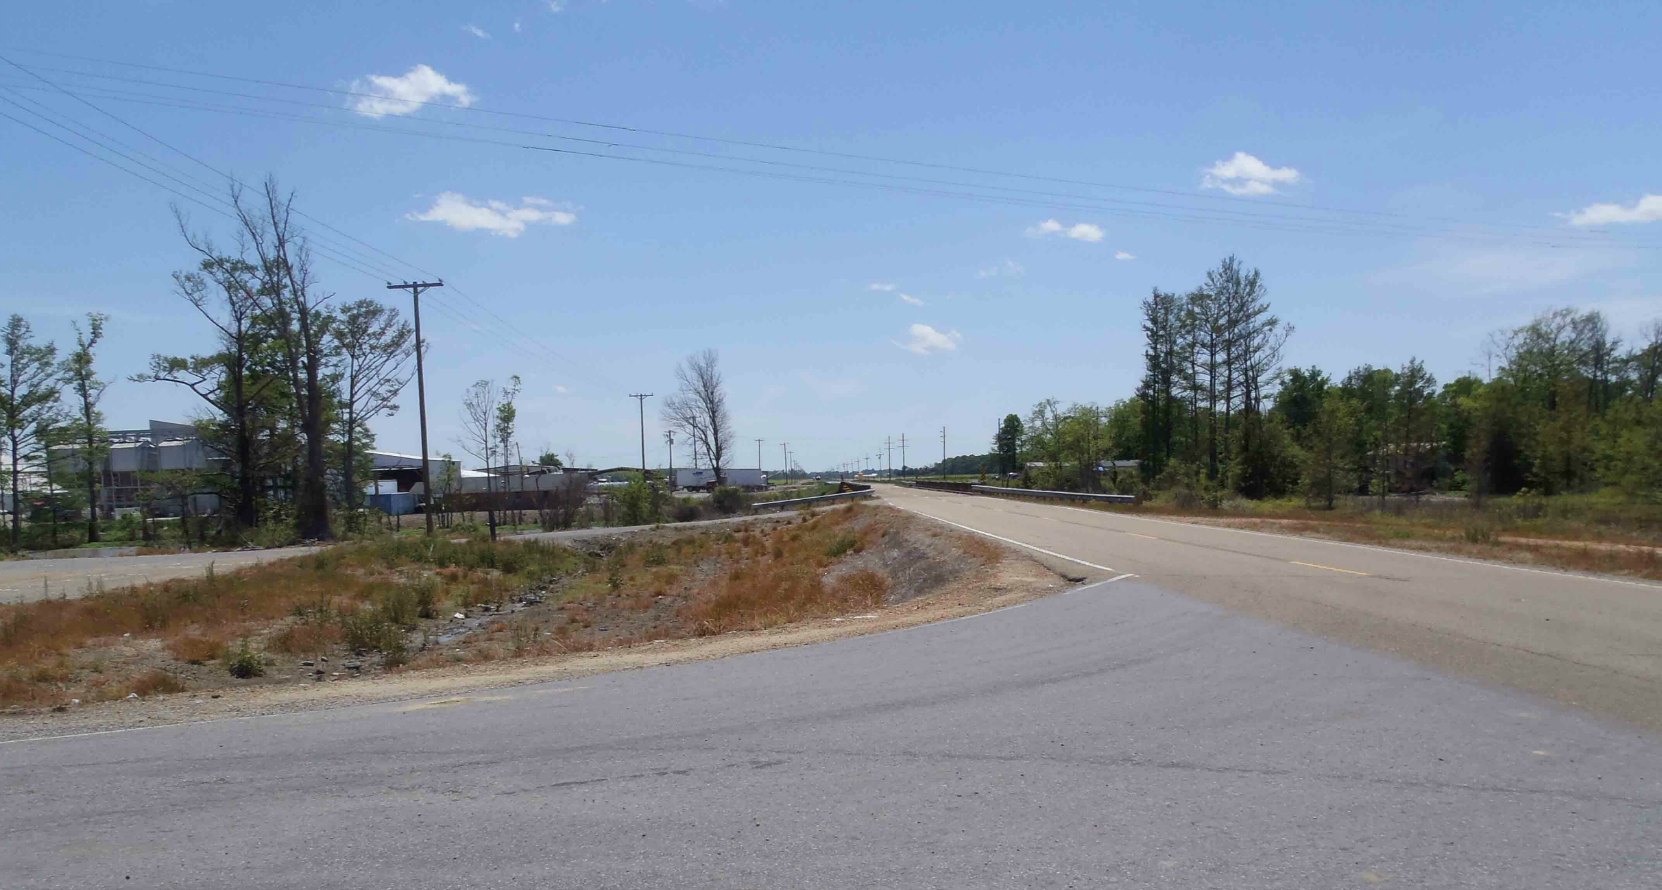 The second reputed site of Robert Johnson's poisoning in 1938, Highway 7 and Leflore County Road 512, near Quito, Leflore County, Mississippi, looking south.